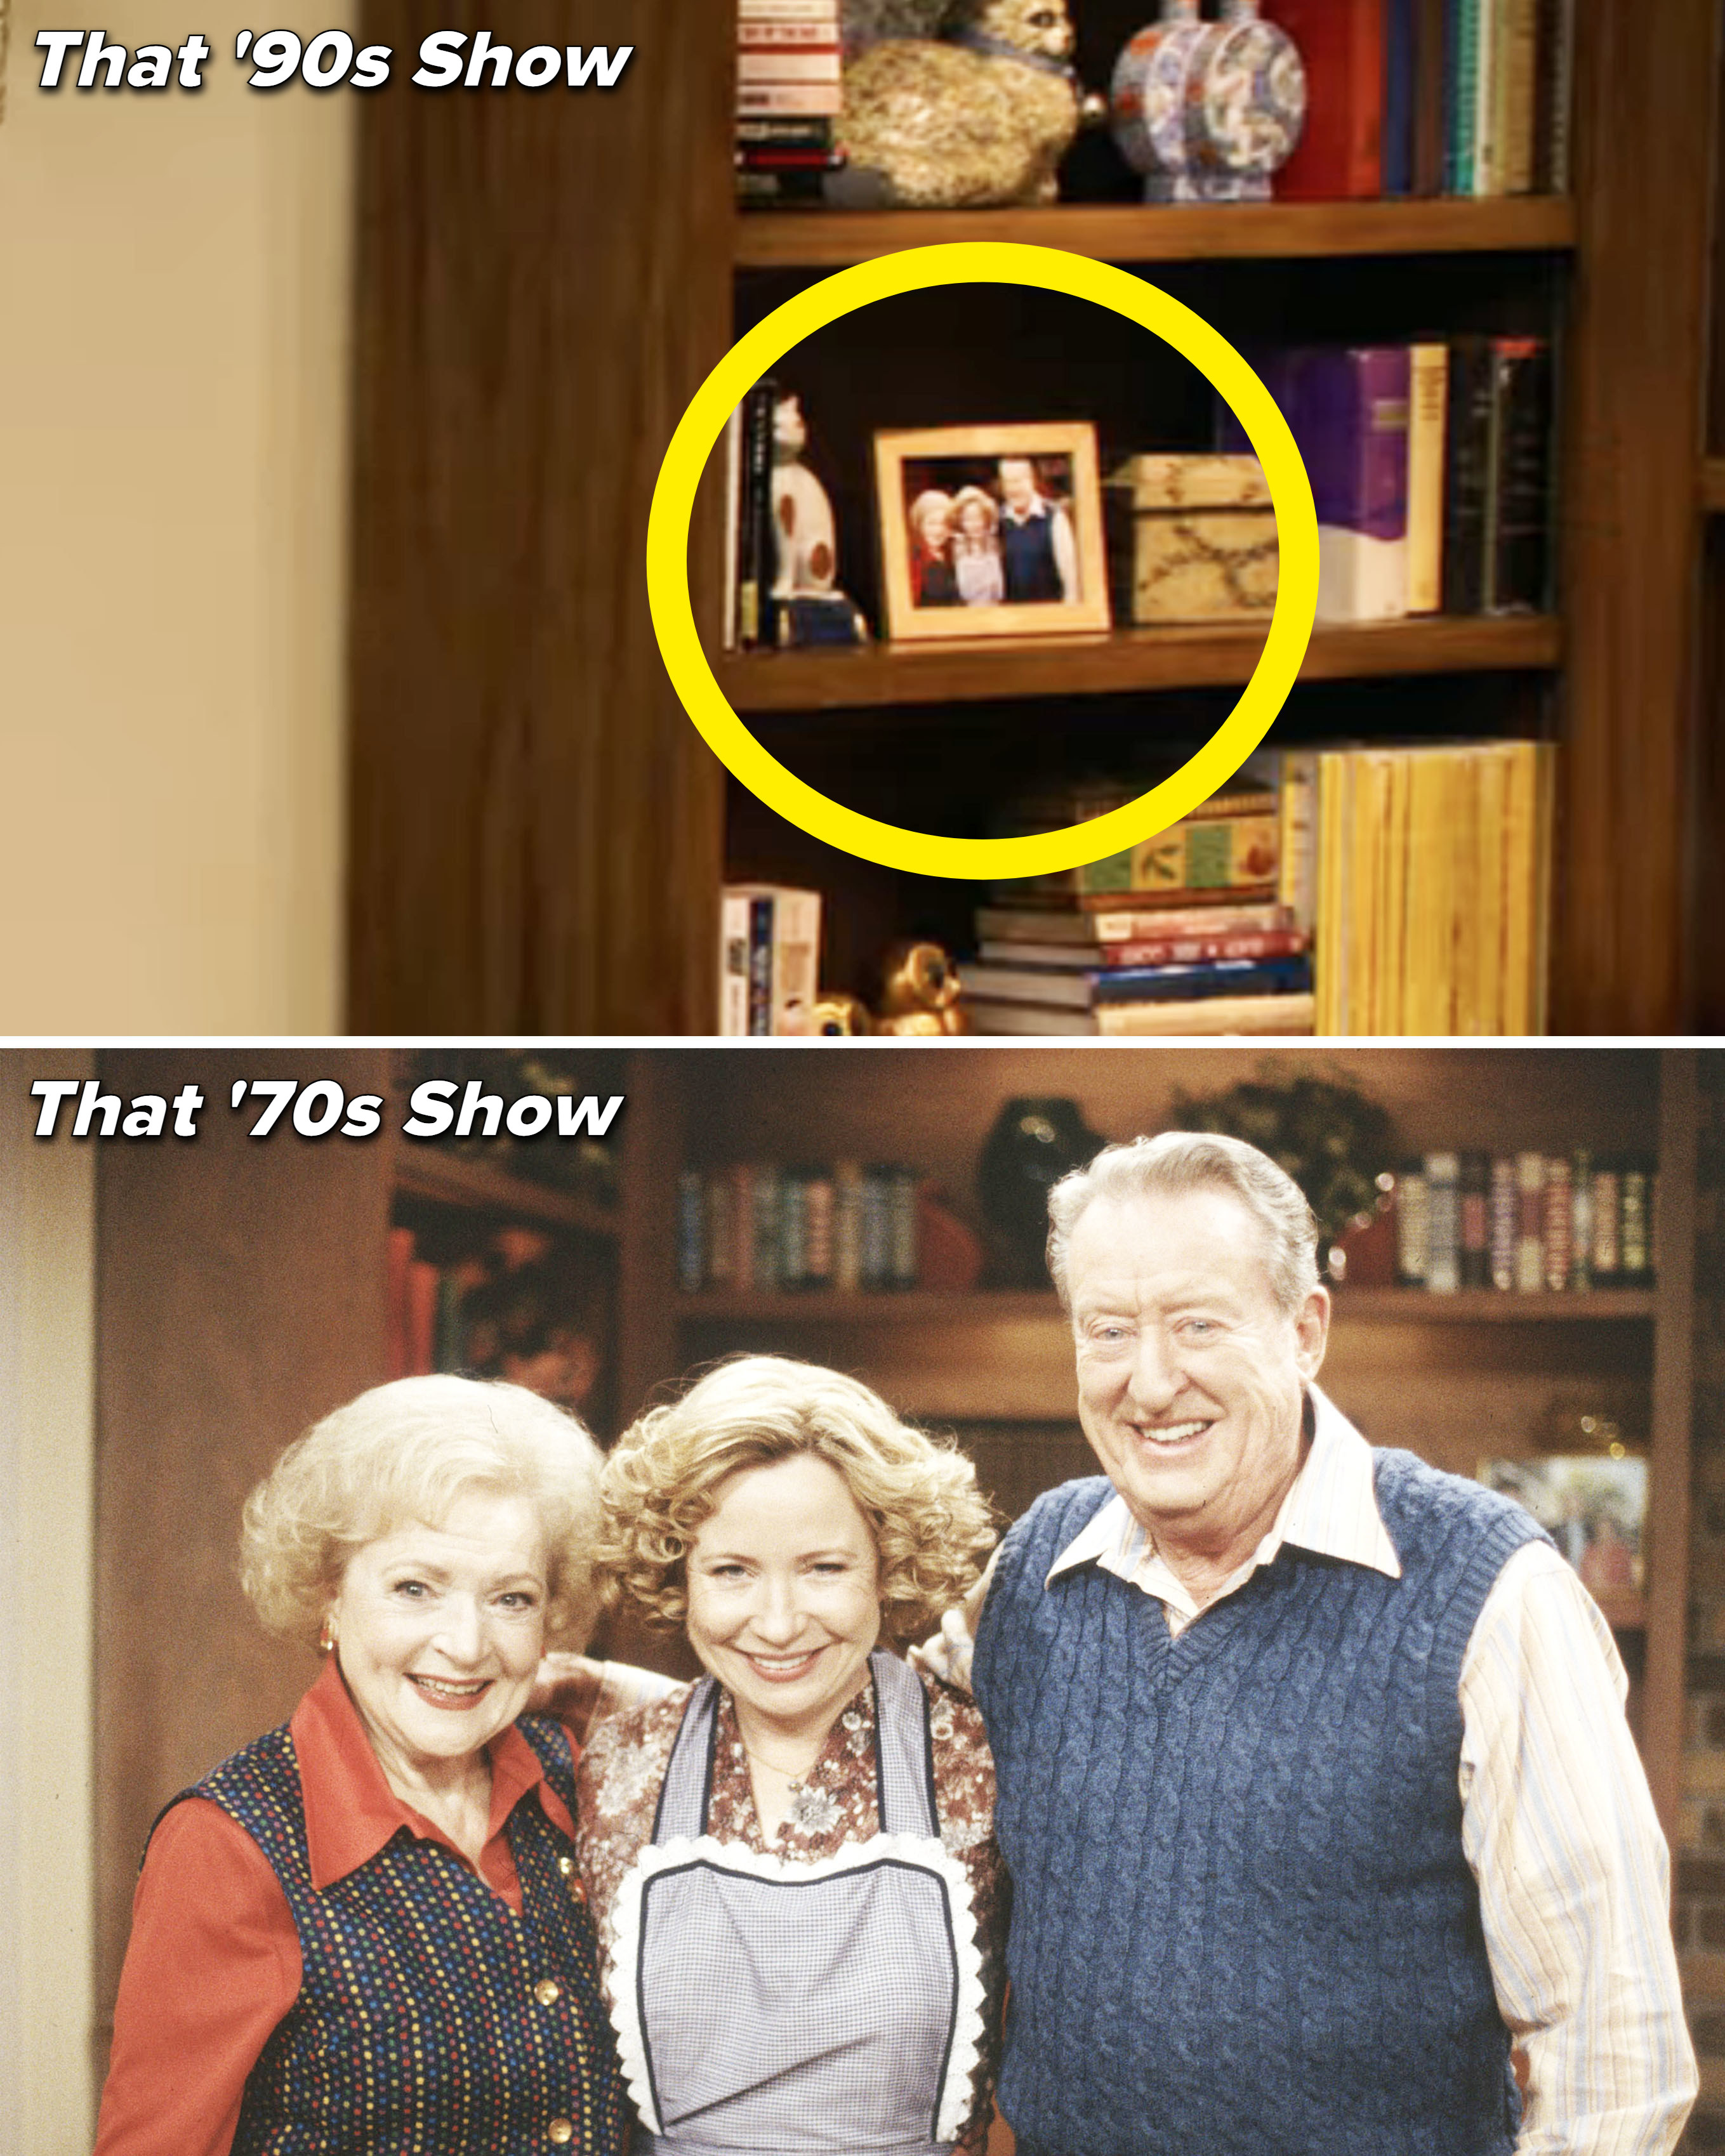 The photo of Tom and Betty on a shelf in That &#x27;90s Show and the two in a scene from That &#x27;70s Show with Debra